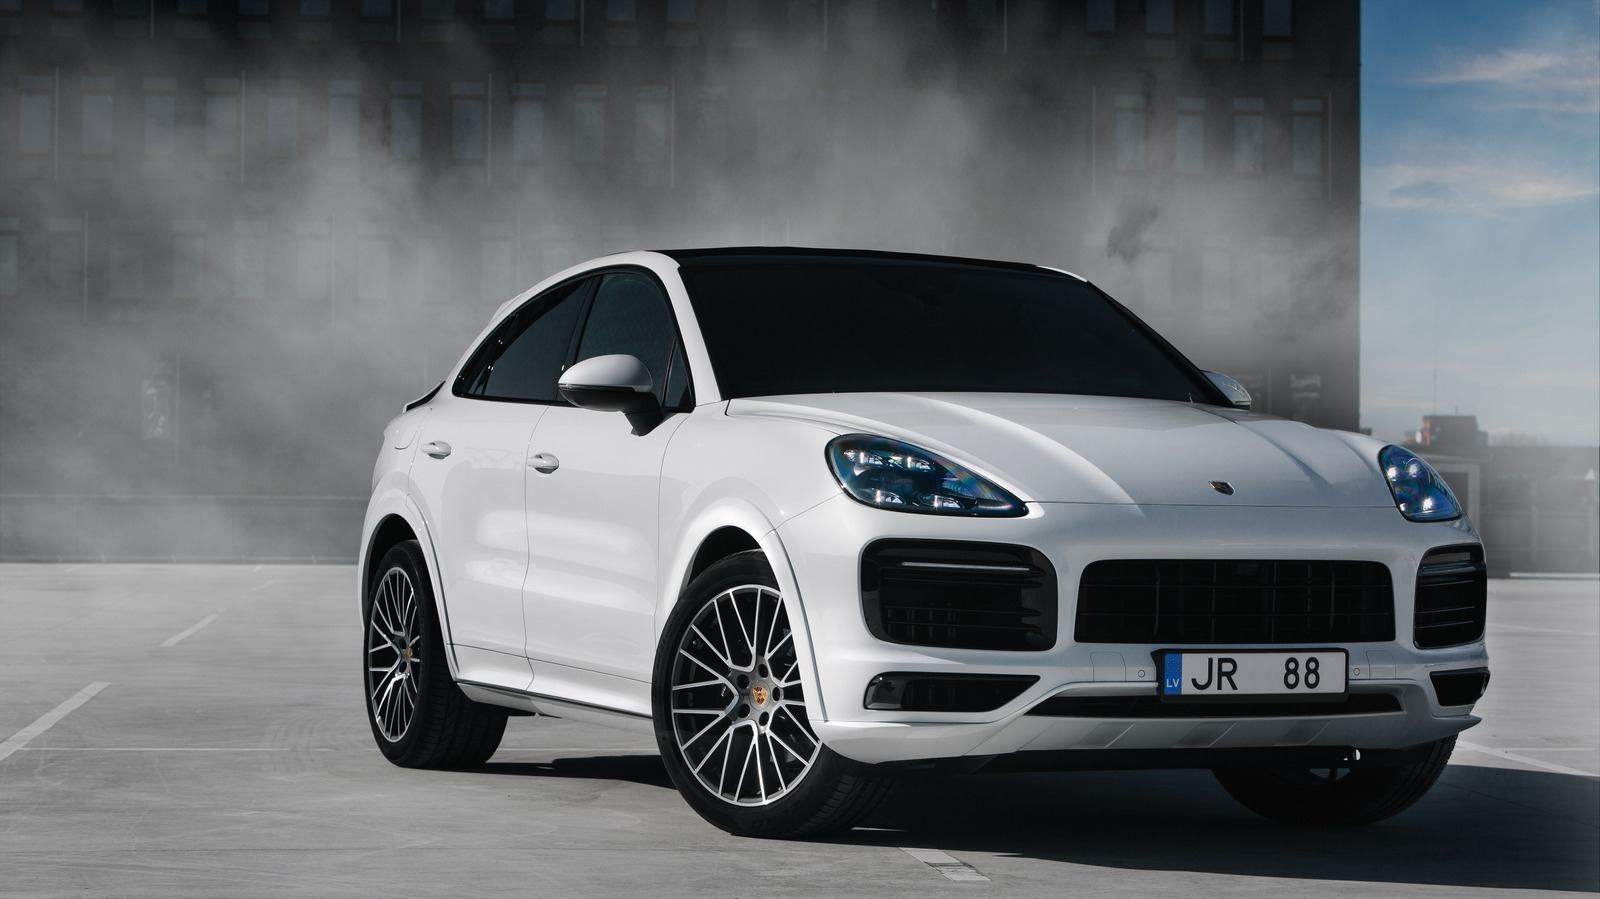 Porsche Reportedly Launching An All-Electric Cayenne EV To Market By 2026 – SlashGear